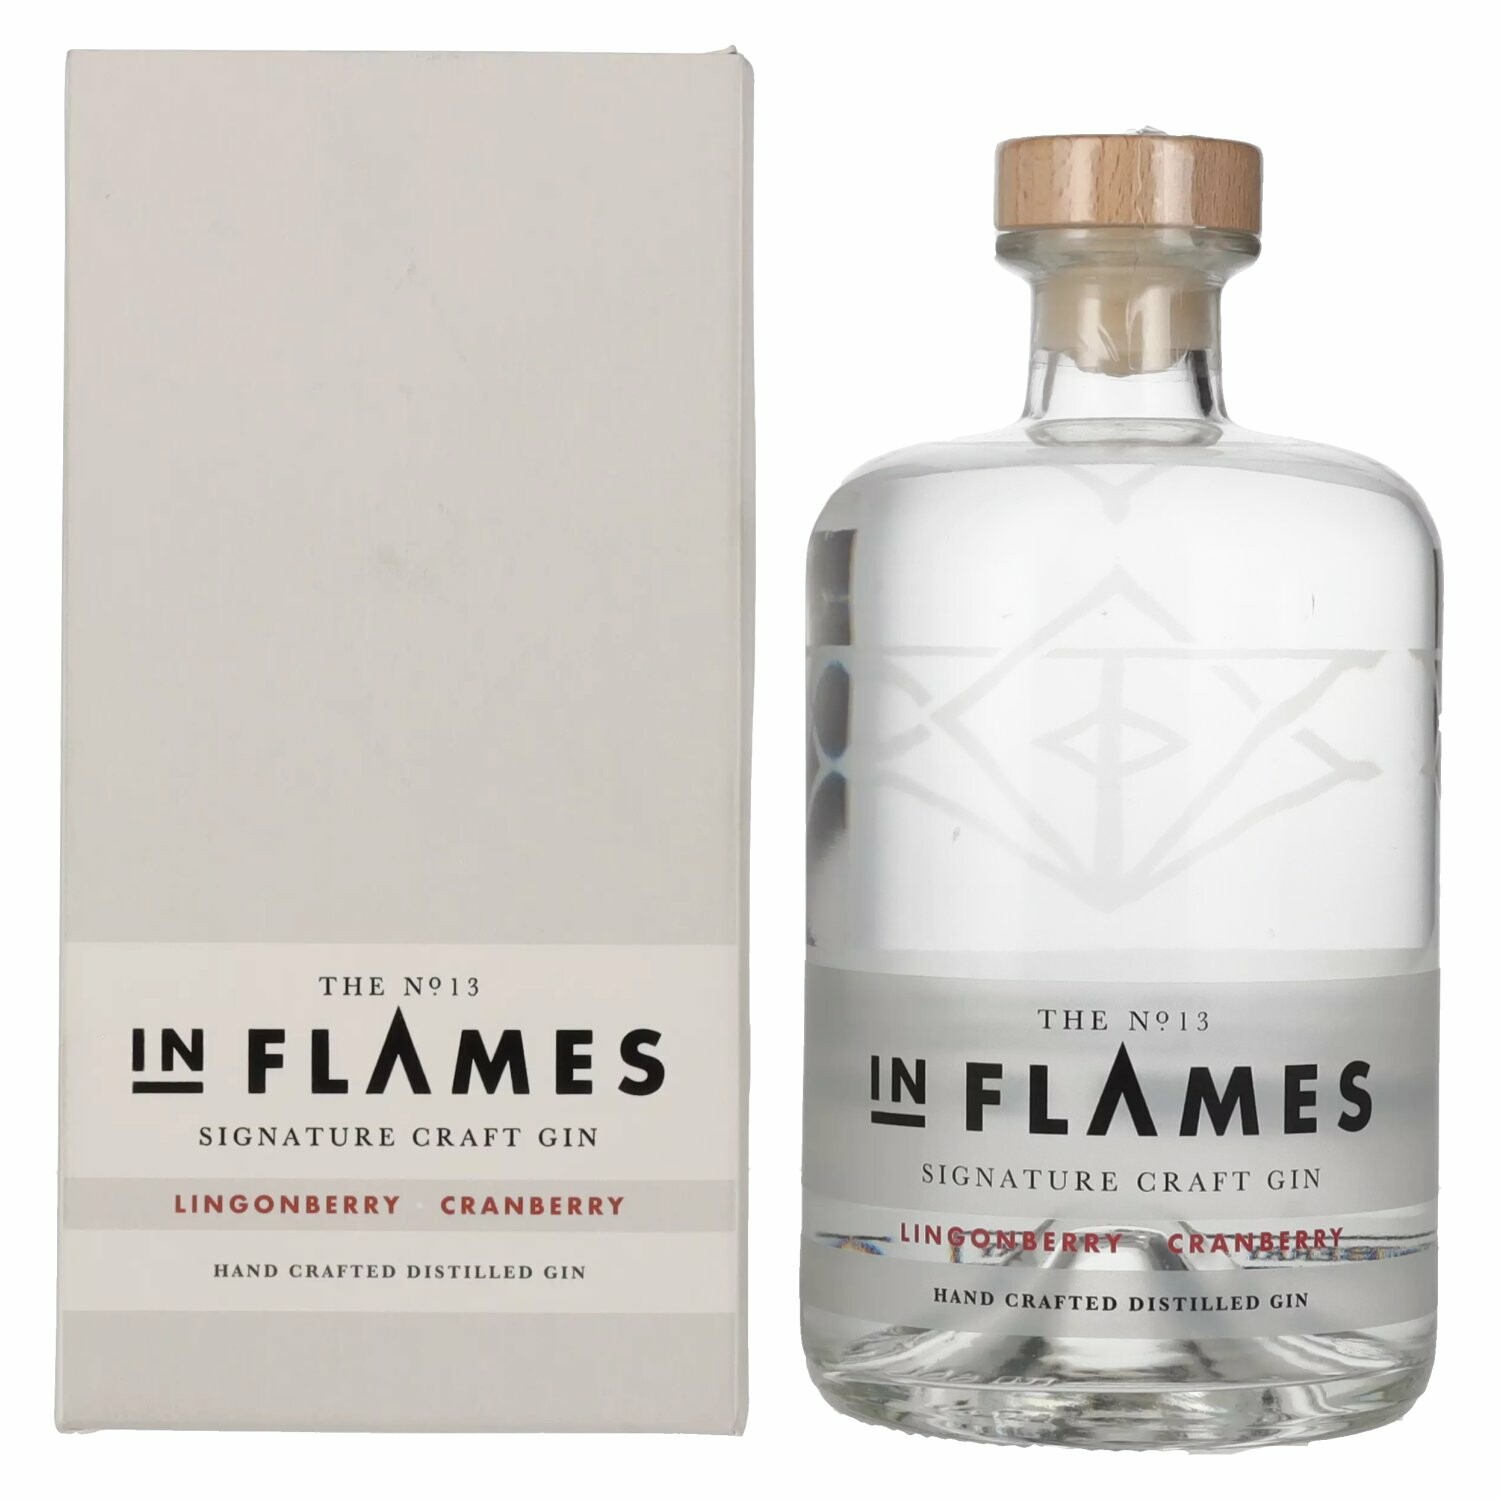 In Flames The No. 13 Signature Craft Gin Lingonberry Cranberry 40% Vol. 0,7l in Giftbox